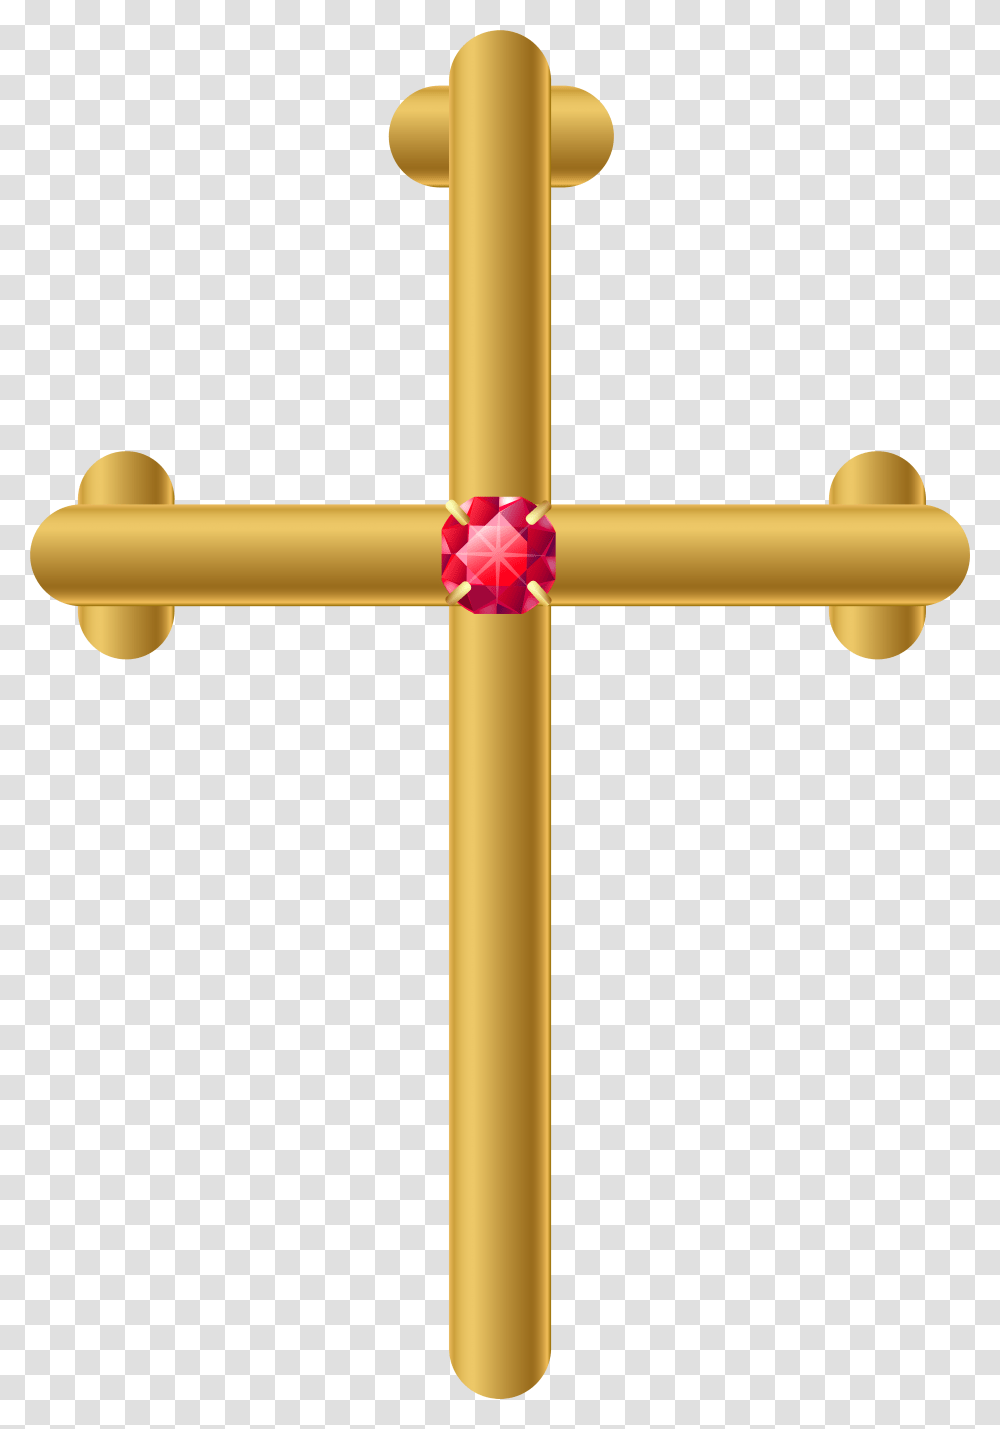 Cross Picture Royalty Free Files Logo Gold Cross Background, Symbol, Hammer, Tool, Crucifix Transparent Png